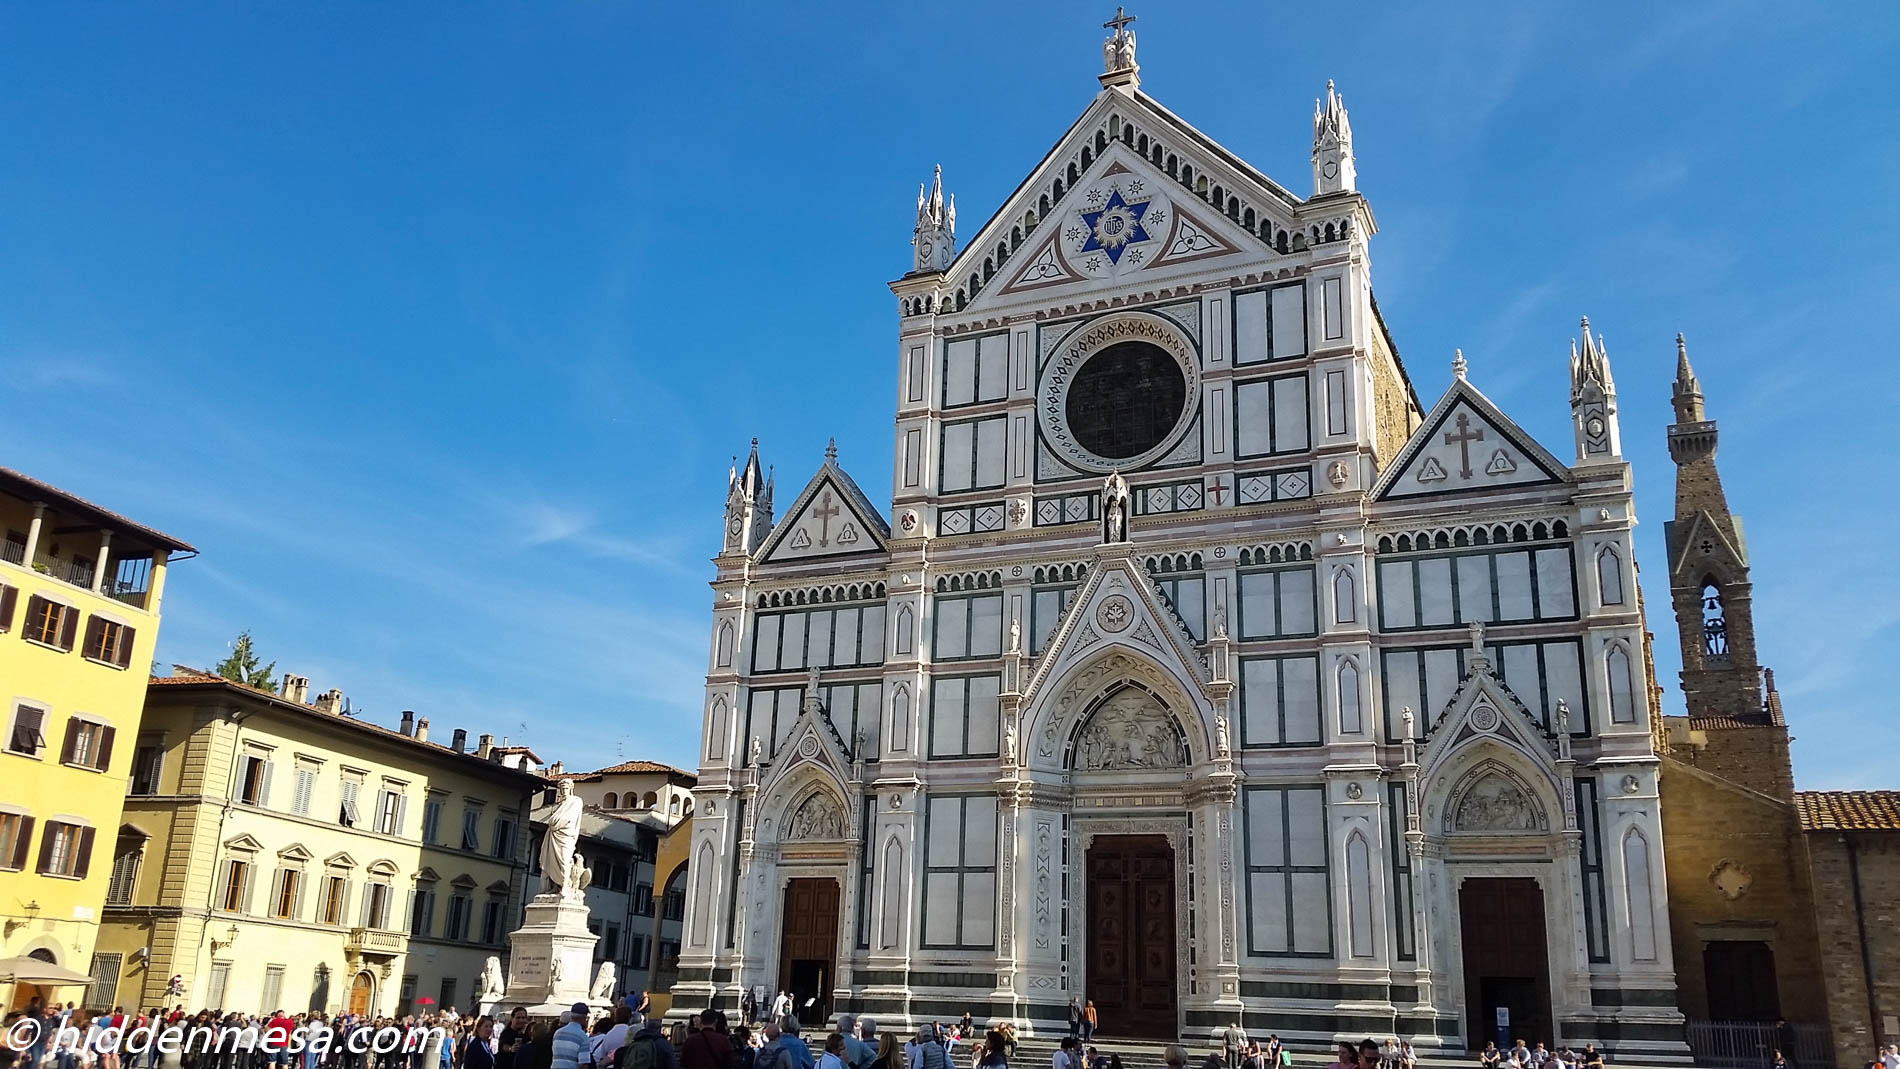 Florence – City of the Renaissance